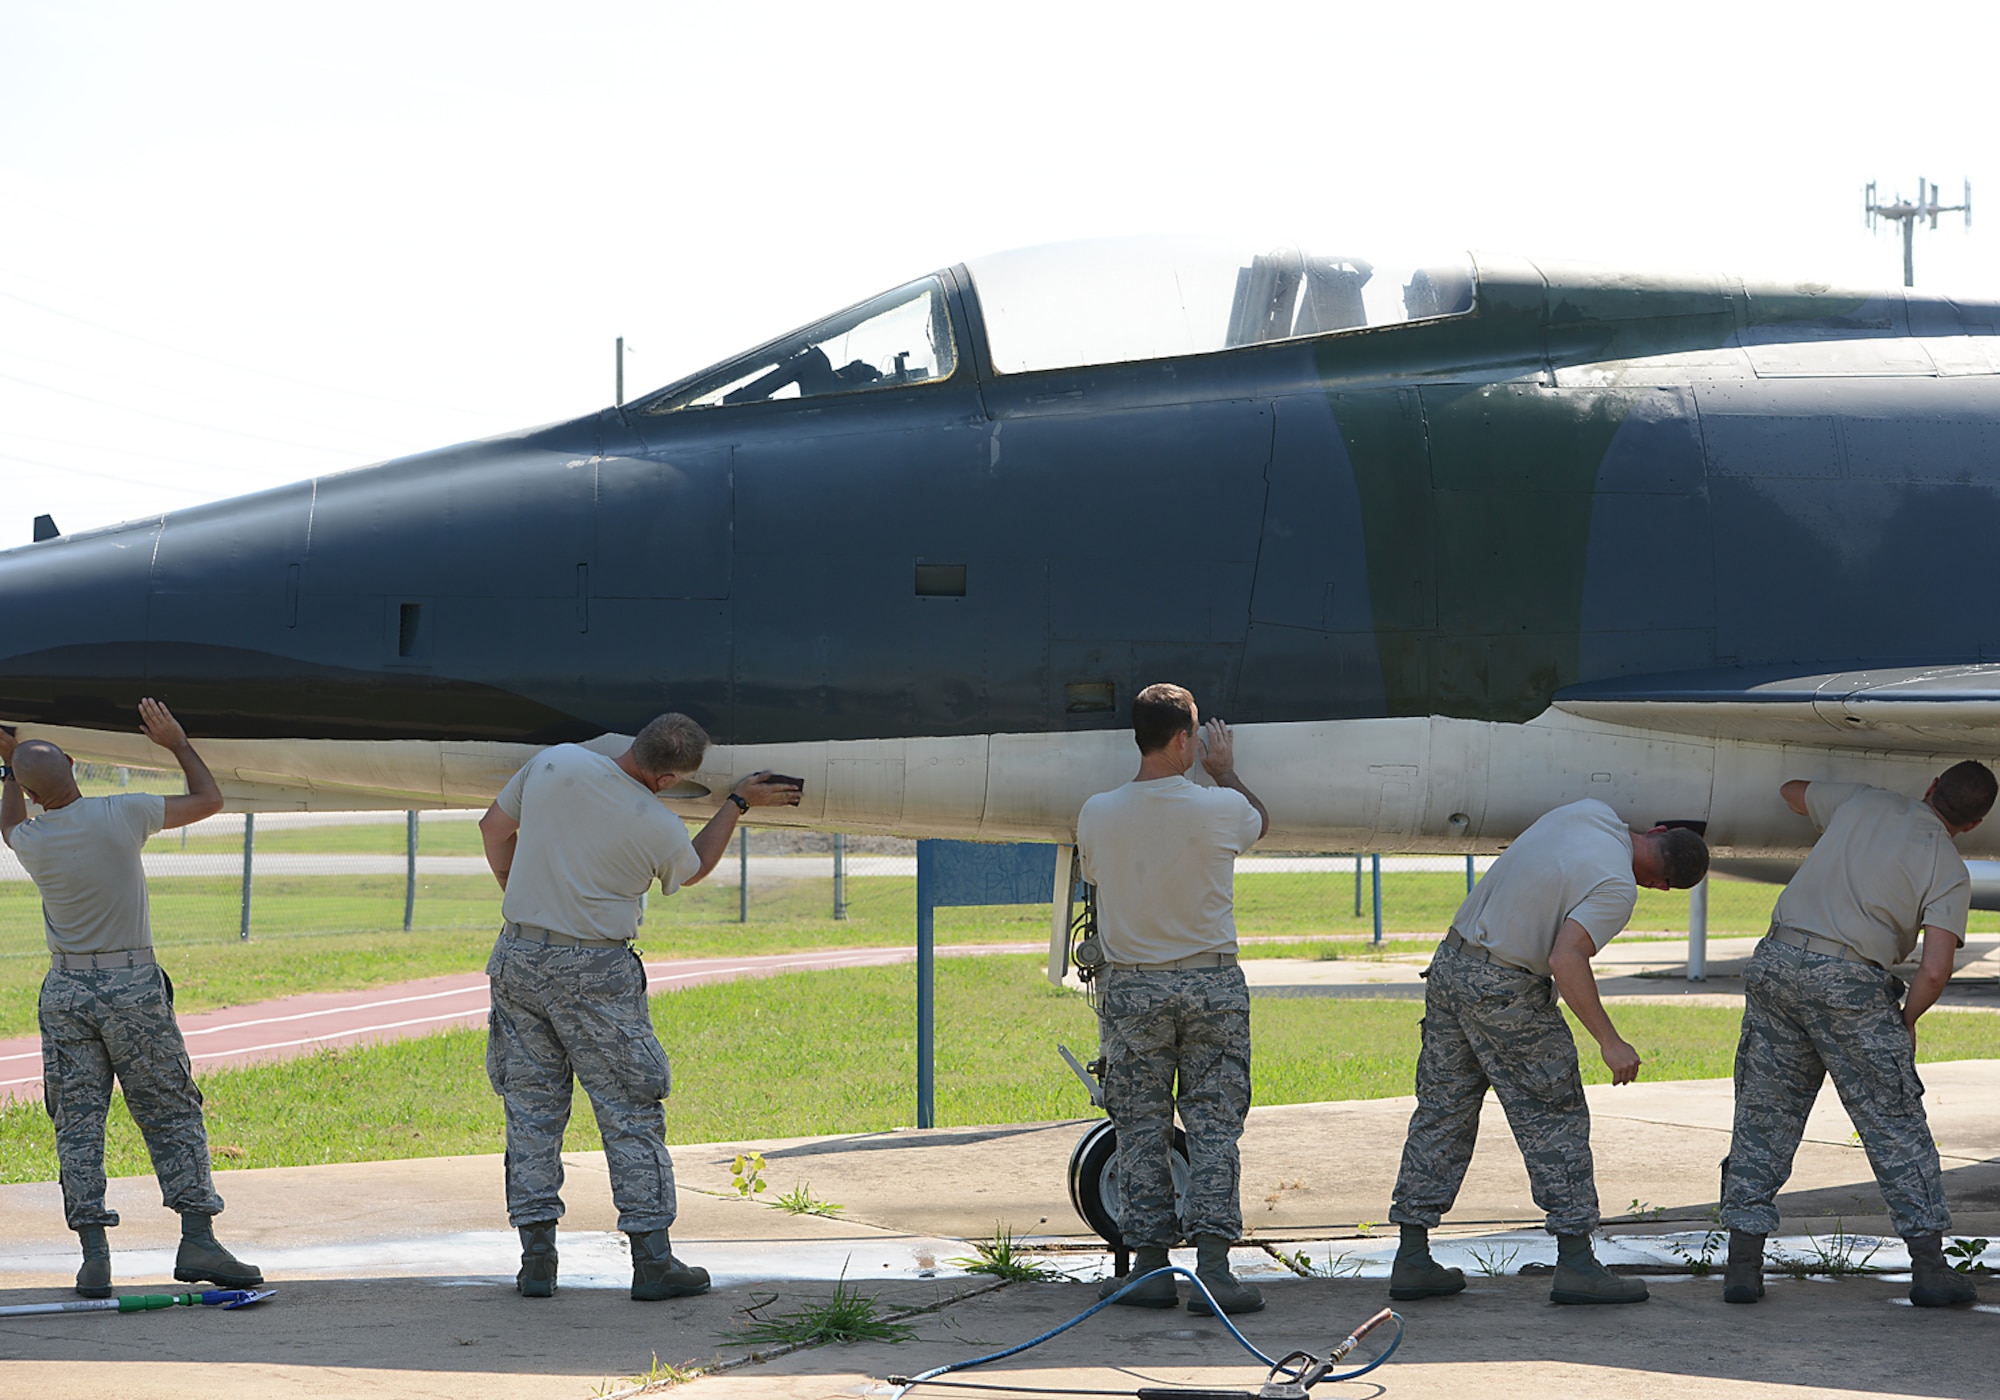 Chief Master Sergeants of the 138th Fighter Wing, wash an F-100 static display aircraft at the Tulsa Air National Guard base, Tulsa Okla., 29 July 2014.  Members of the 138th FW Chiefs Council gathered to wash the static aircraft in an effort to keep them looking nice for public display.  (U.S. National Guard photo by Senior Master Sgt.  Preston L. Chasteen/Released)